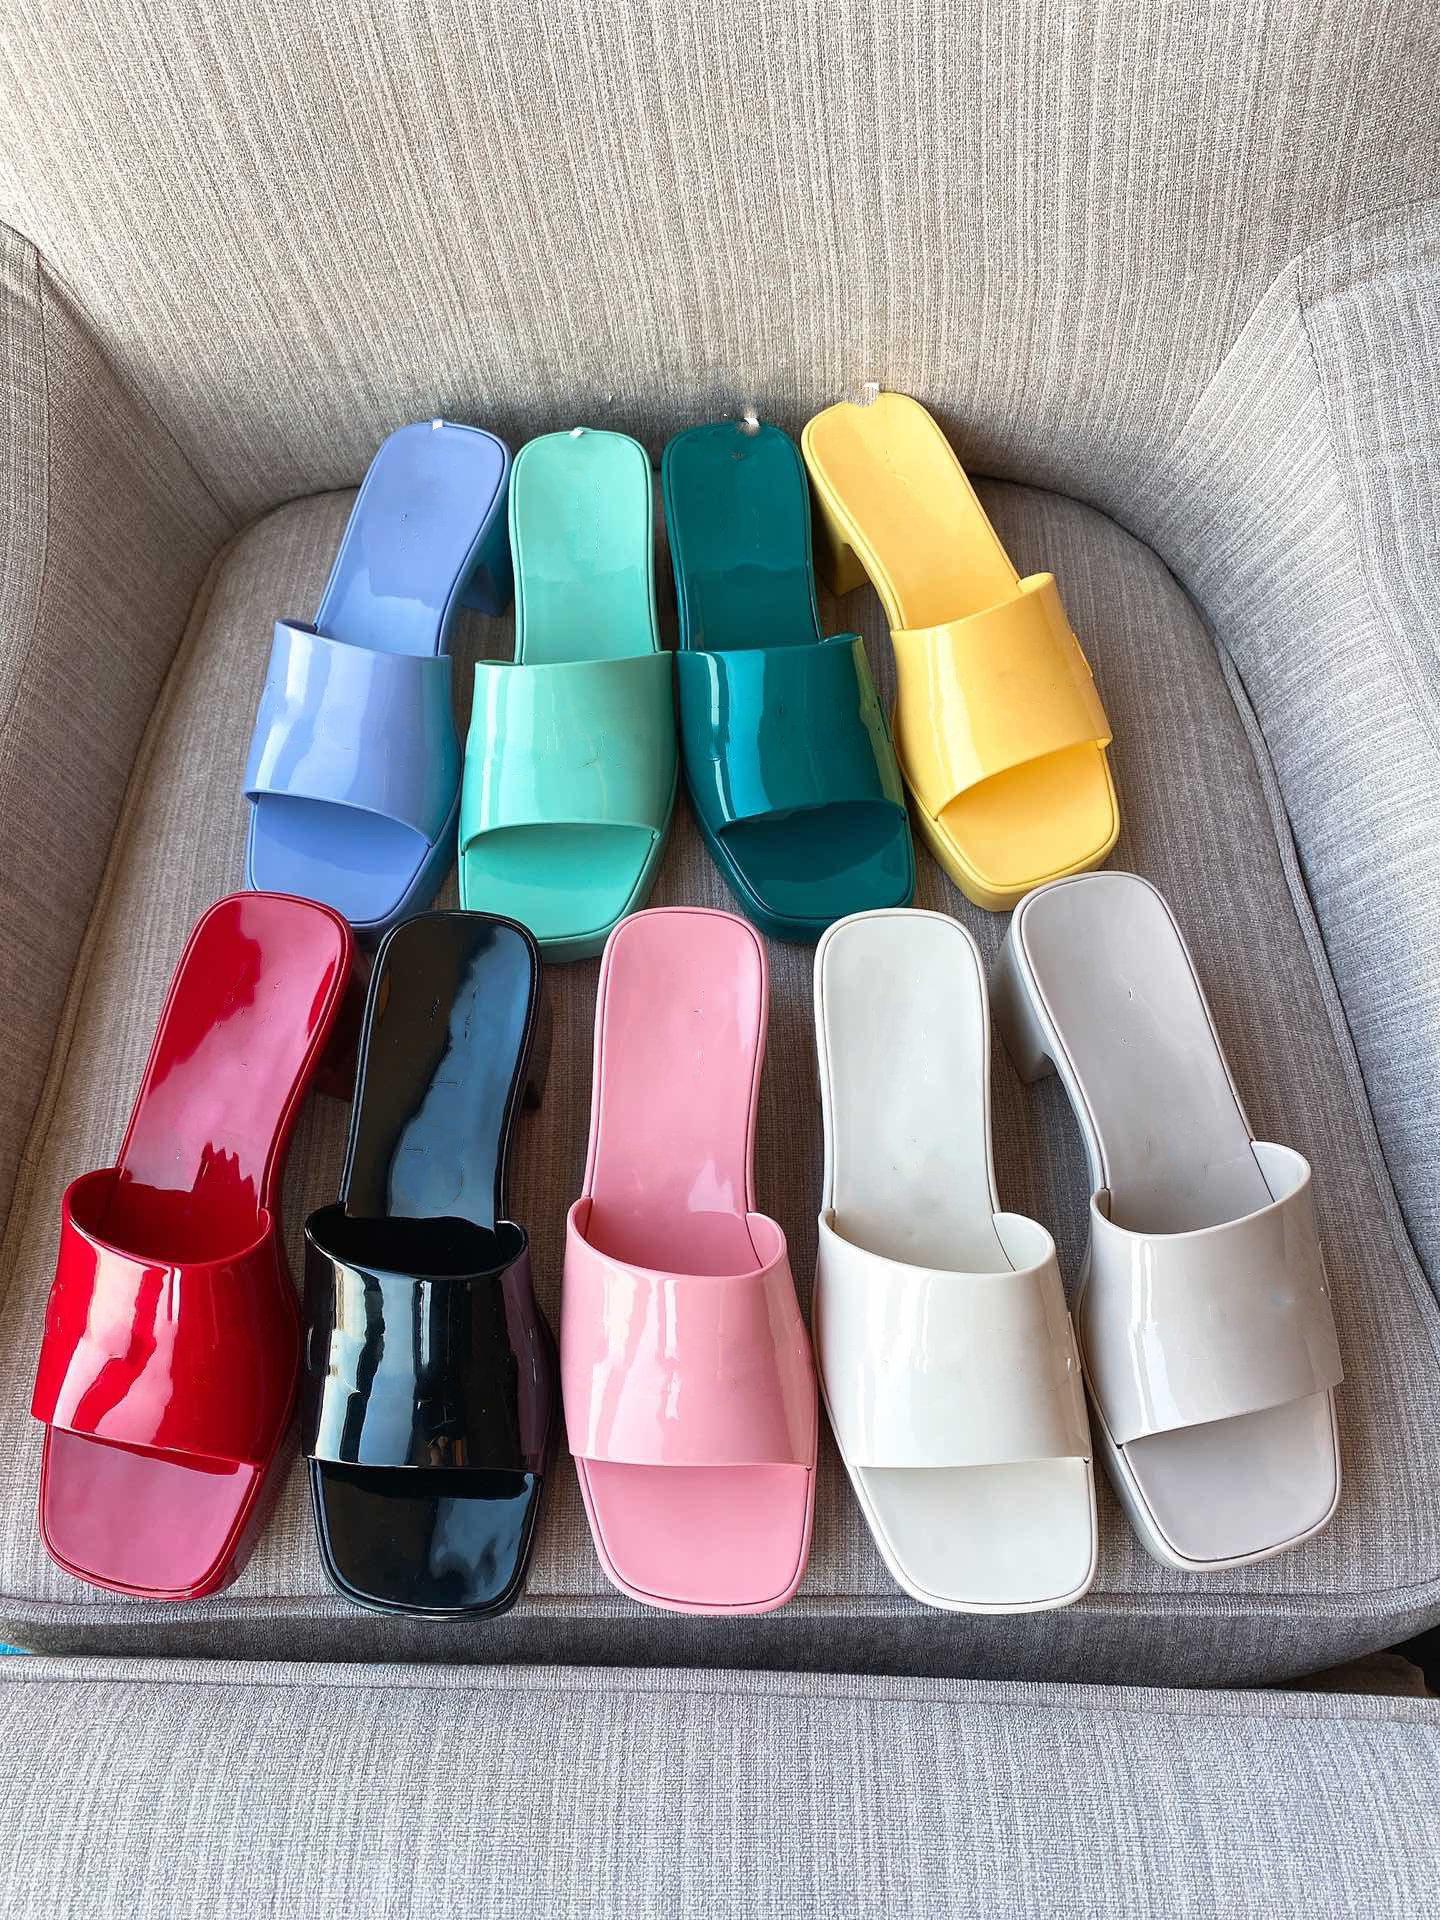 

With Box Slippers designer thick heel women's sandals 2022 beach seaside candy color bathhouse retro rubber jelly flip flops 35-41 UG, Black